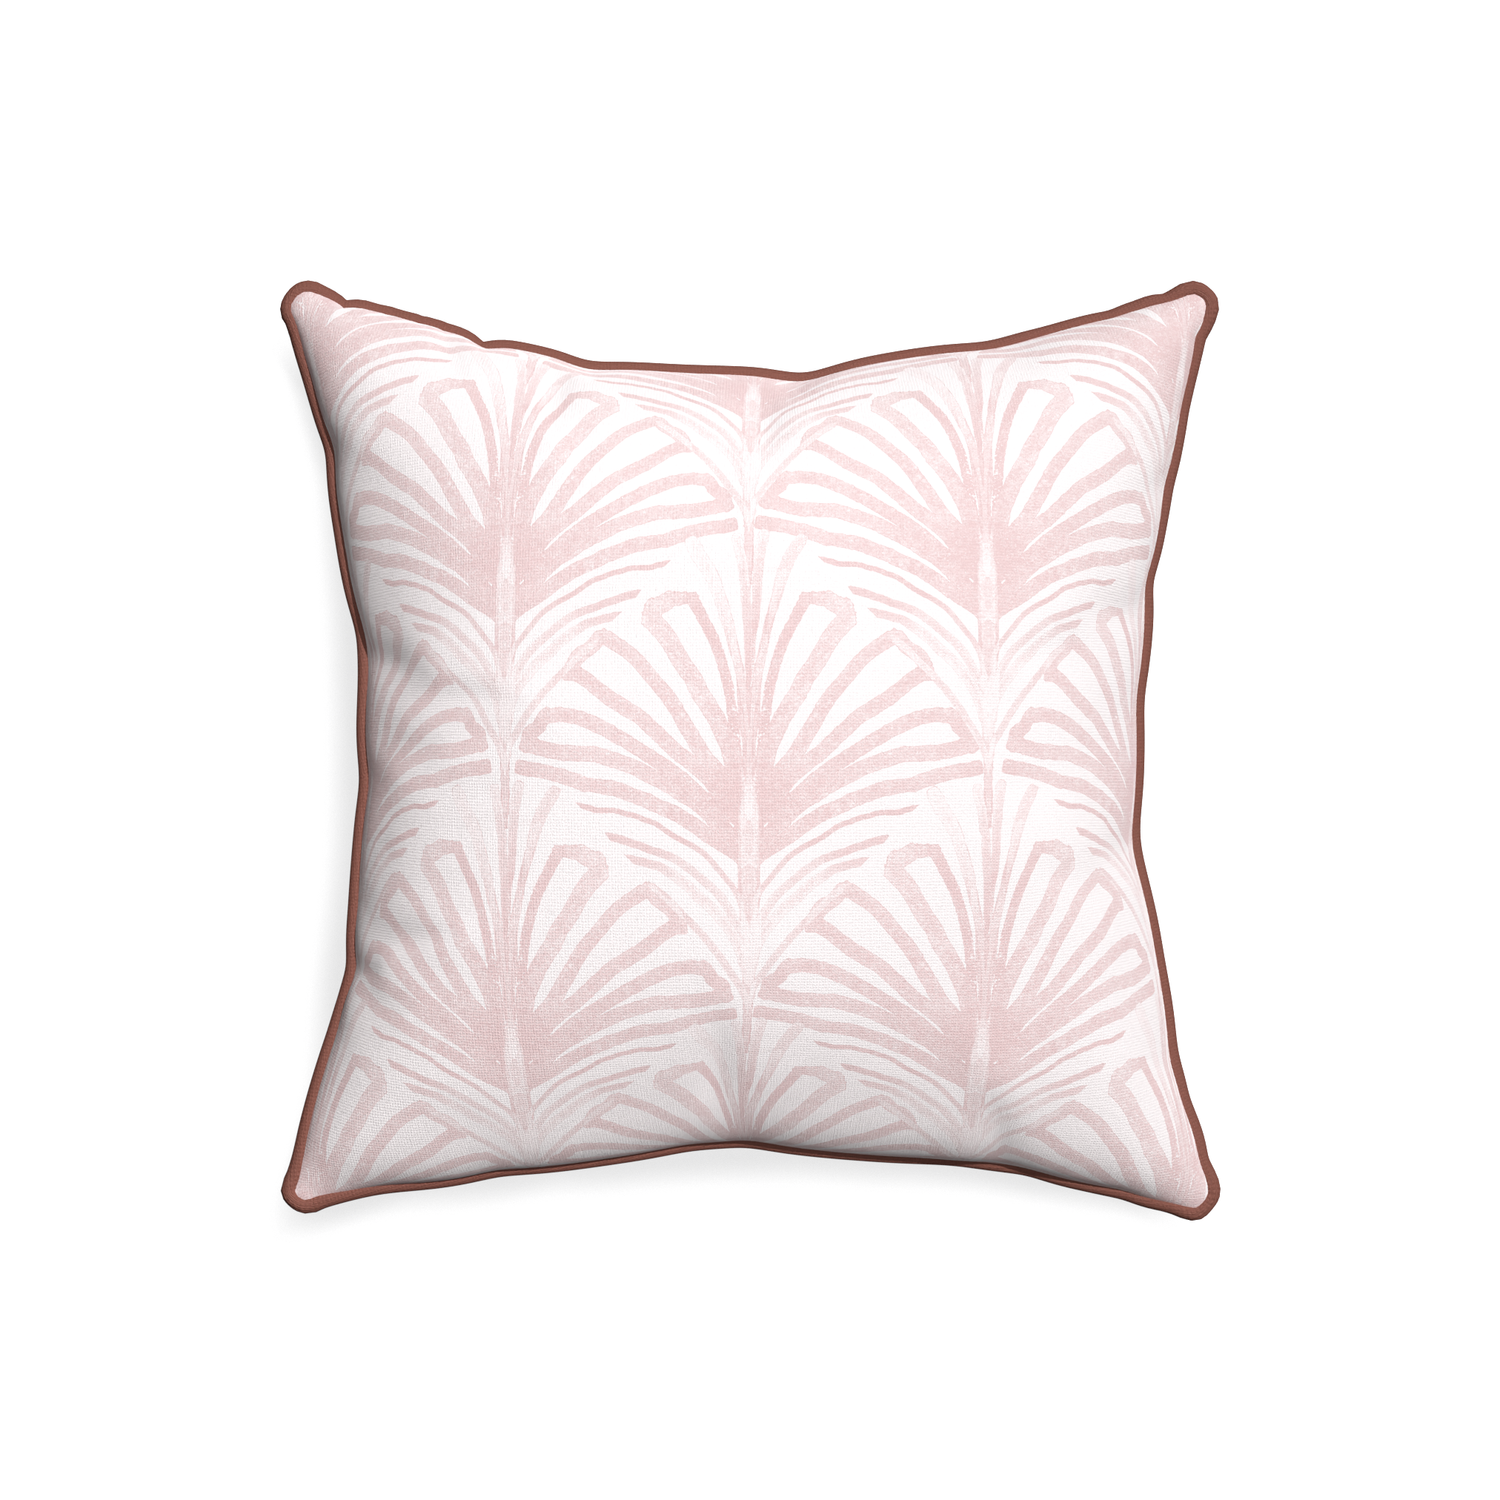 20-square suzy rose custom pillow with w piping on white background